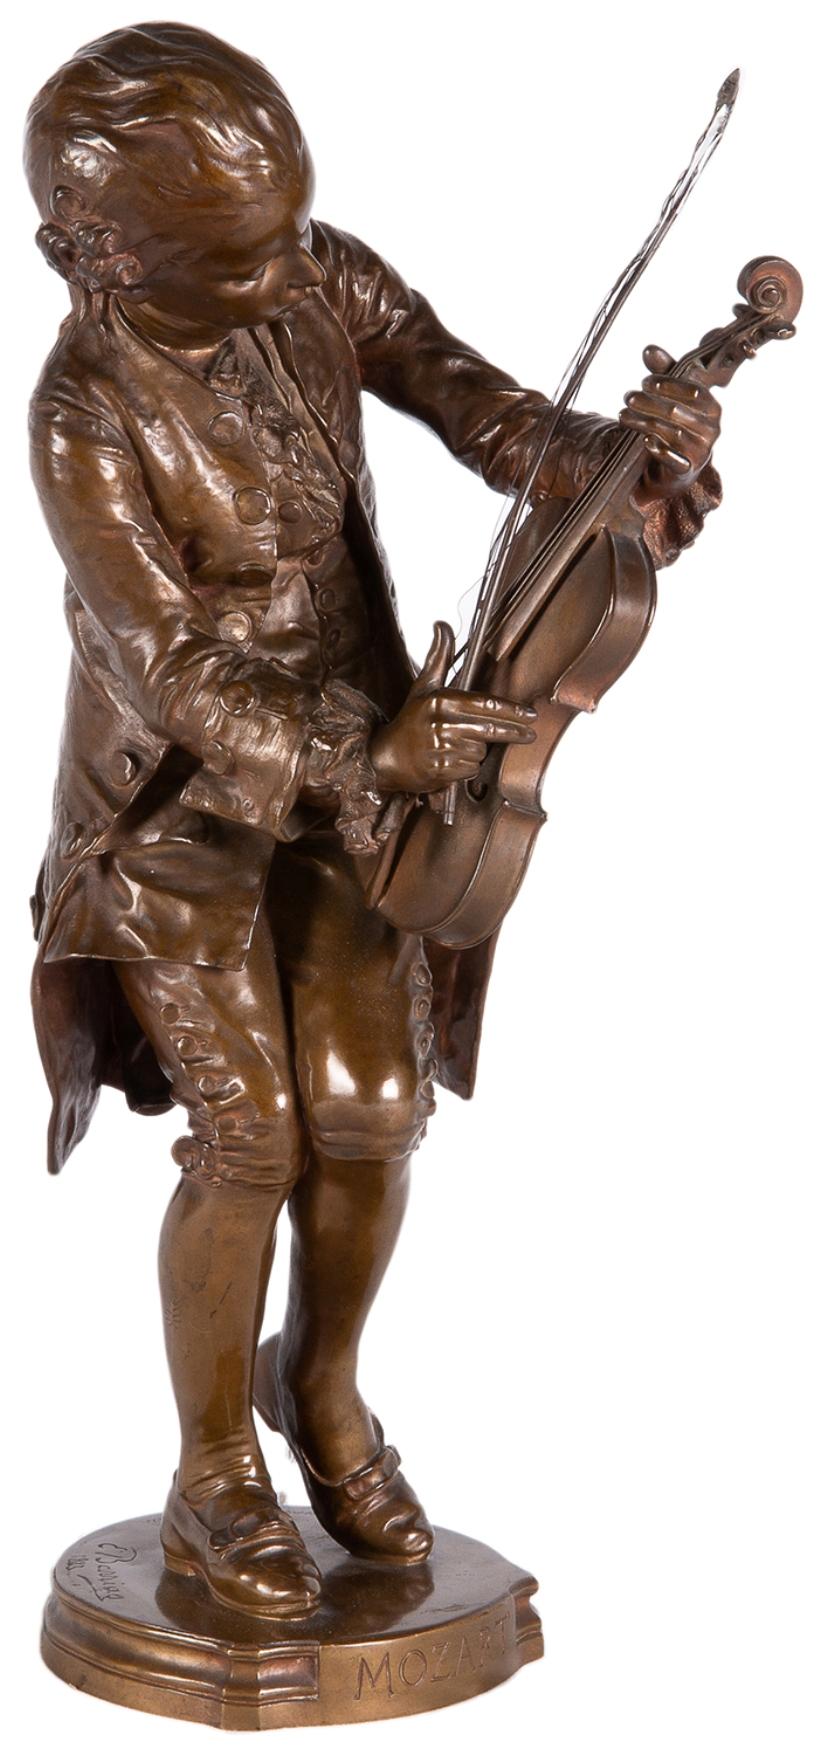 A very good quality 19th century bronze statue of a young Mozart hold a Violin, by Barbedienne, and E. Barrias 1883.